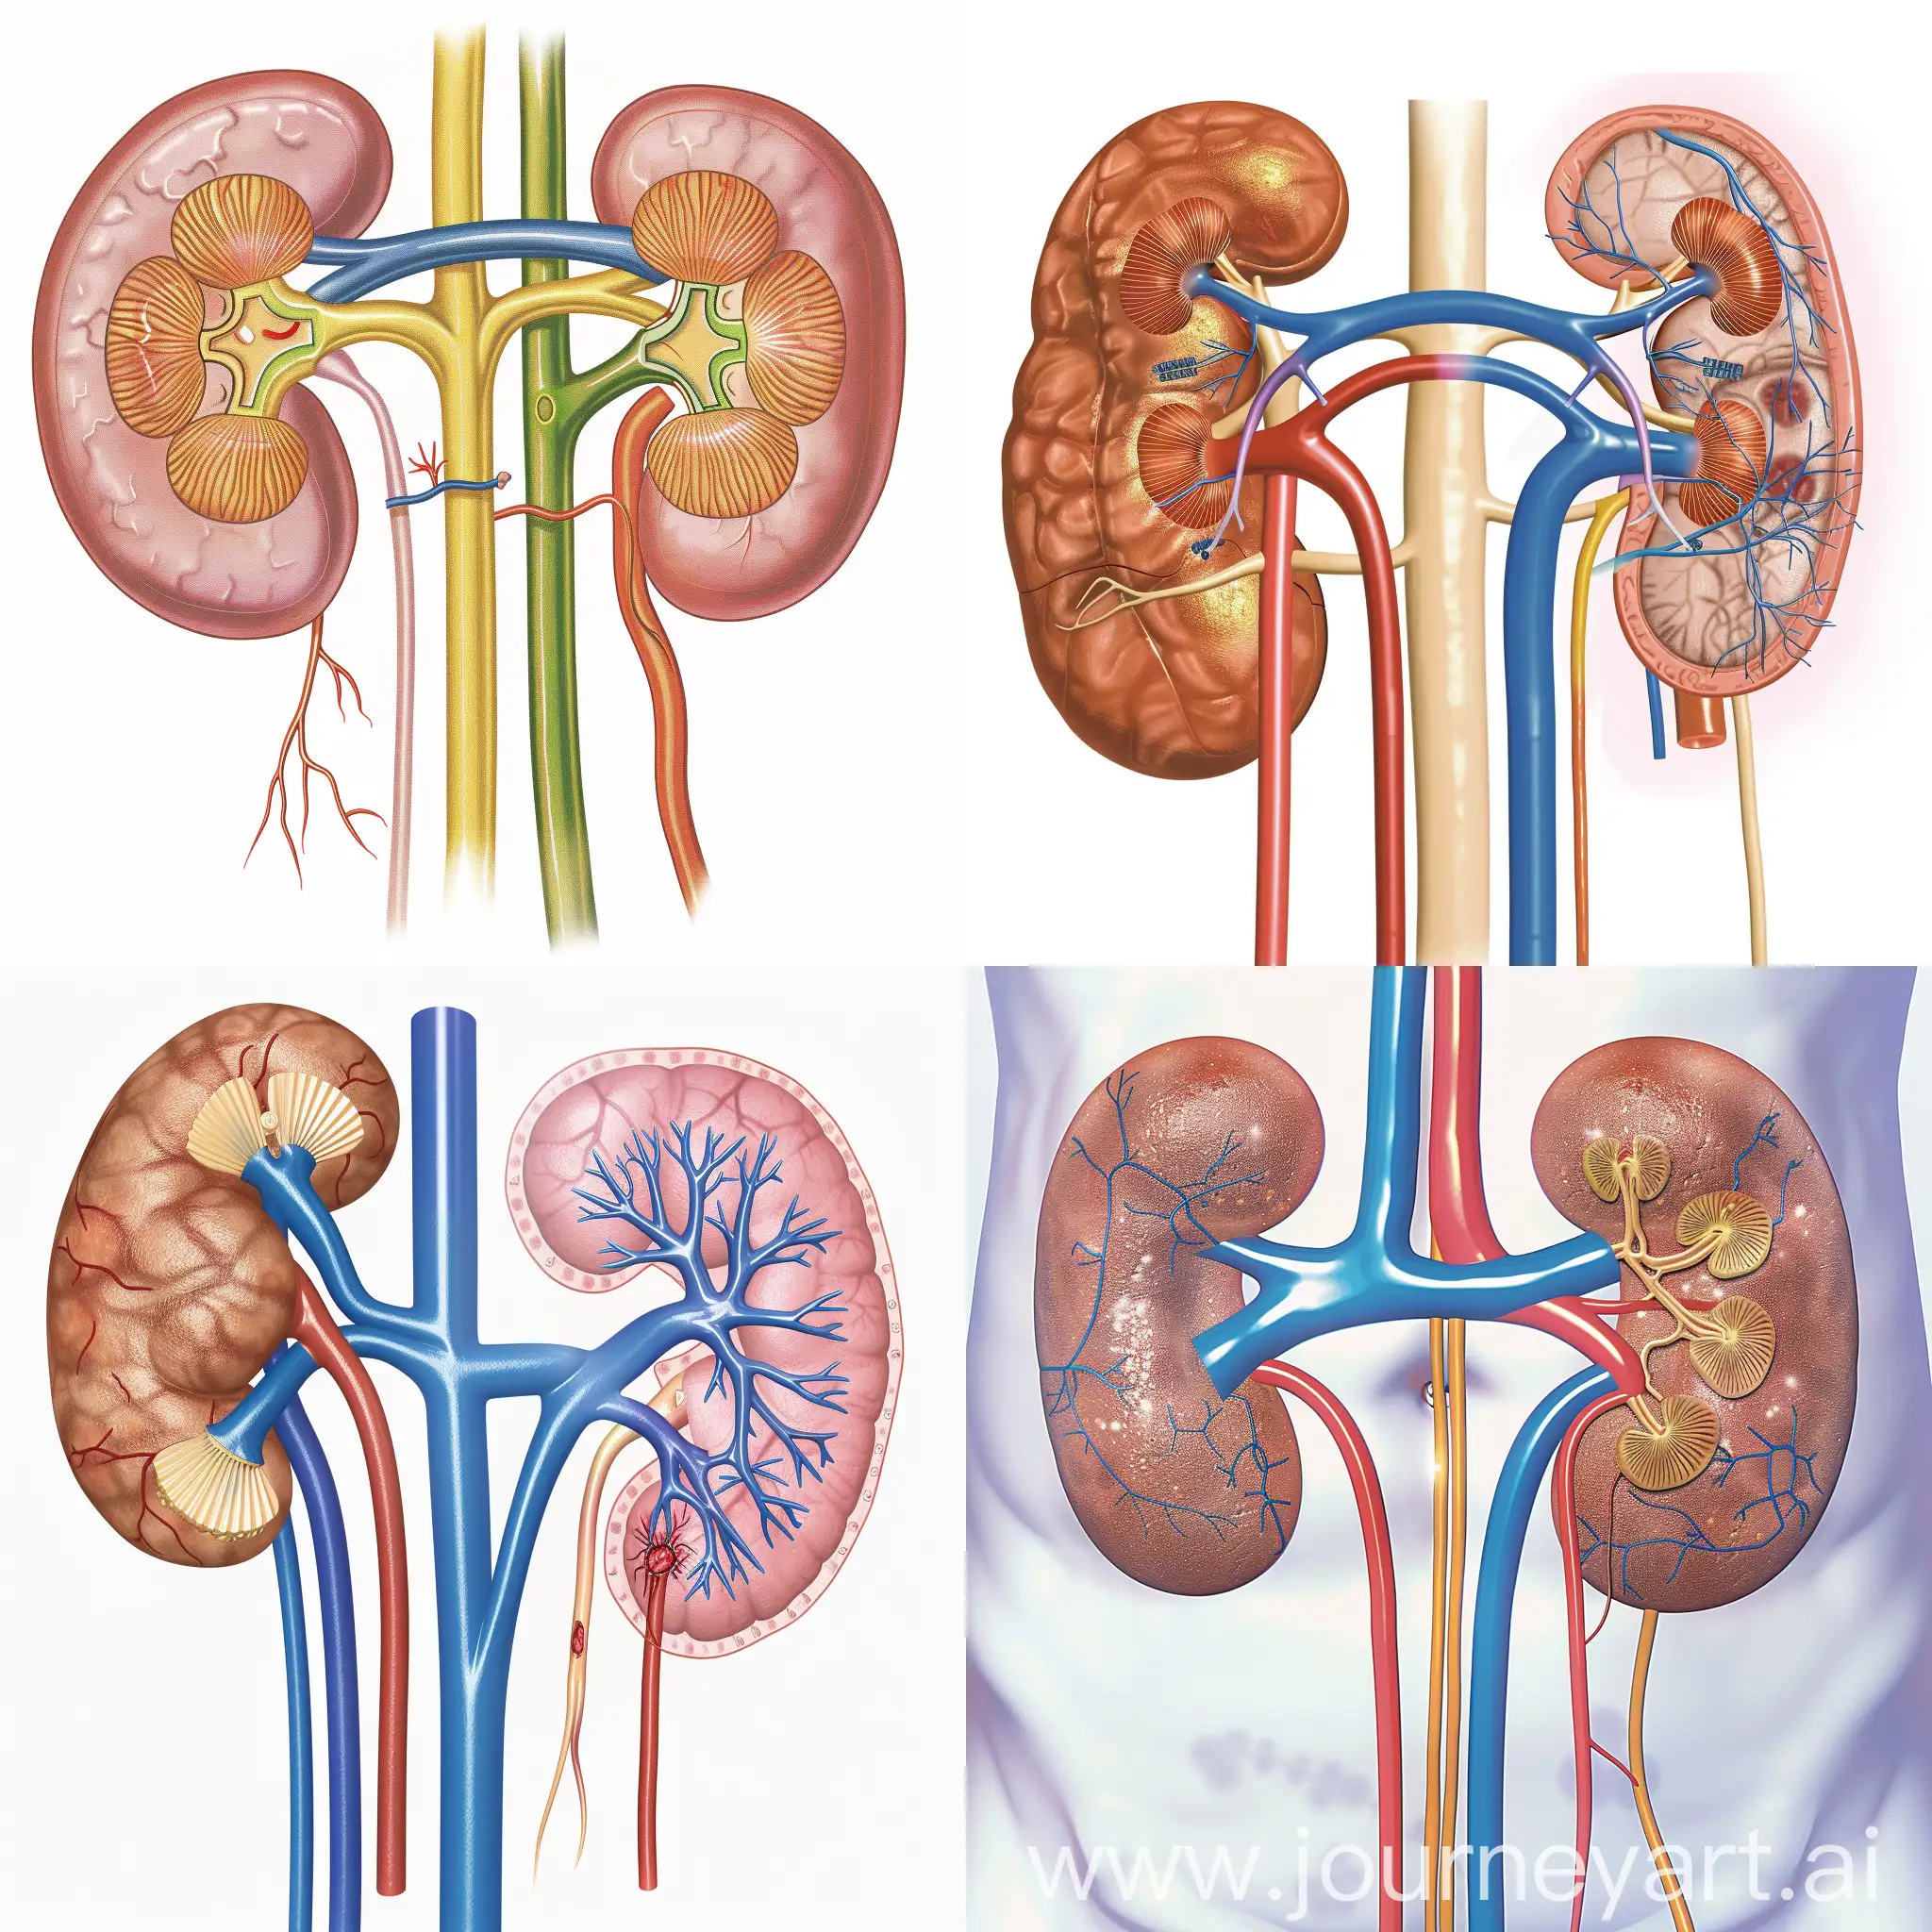 Create the diagram of human kidney showing the left good and the right damaged kidney